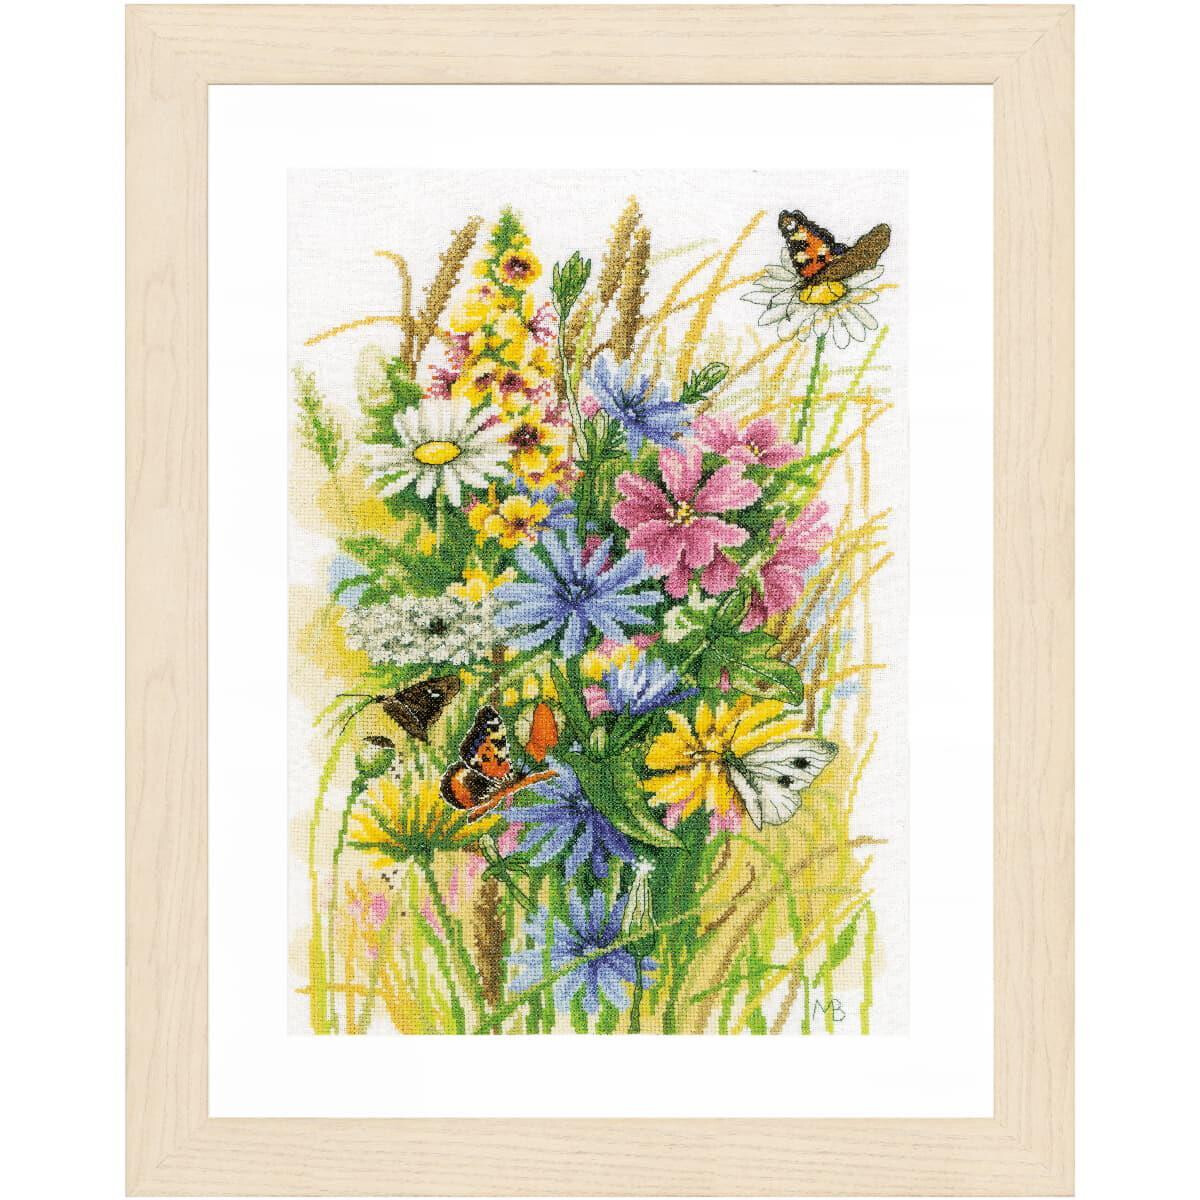 A framed painting shows a colorful bouquet of wildflowers...